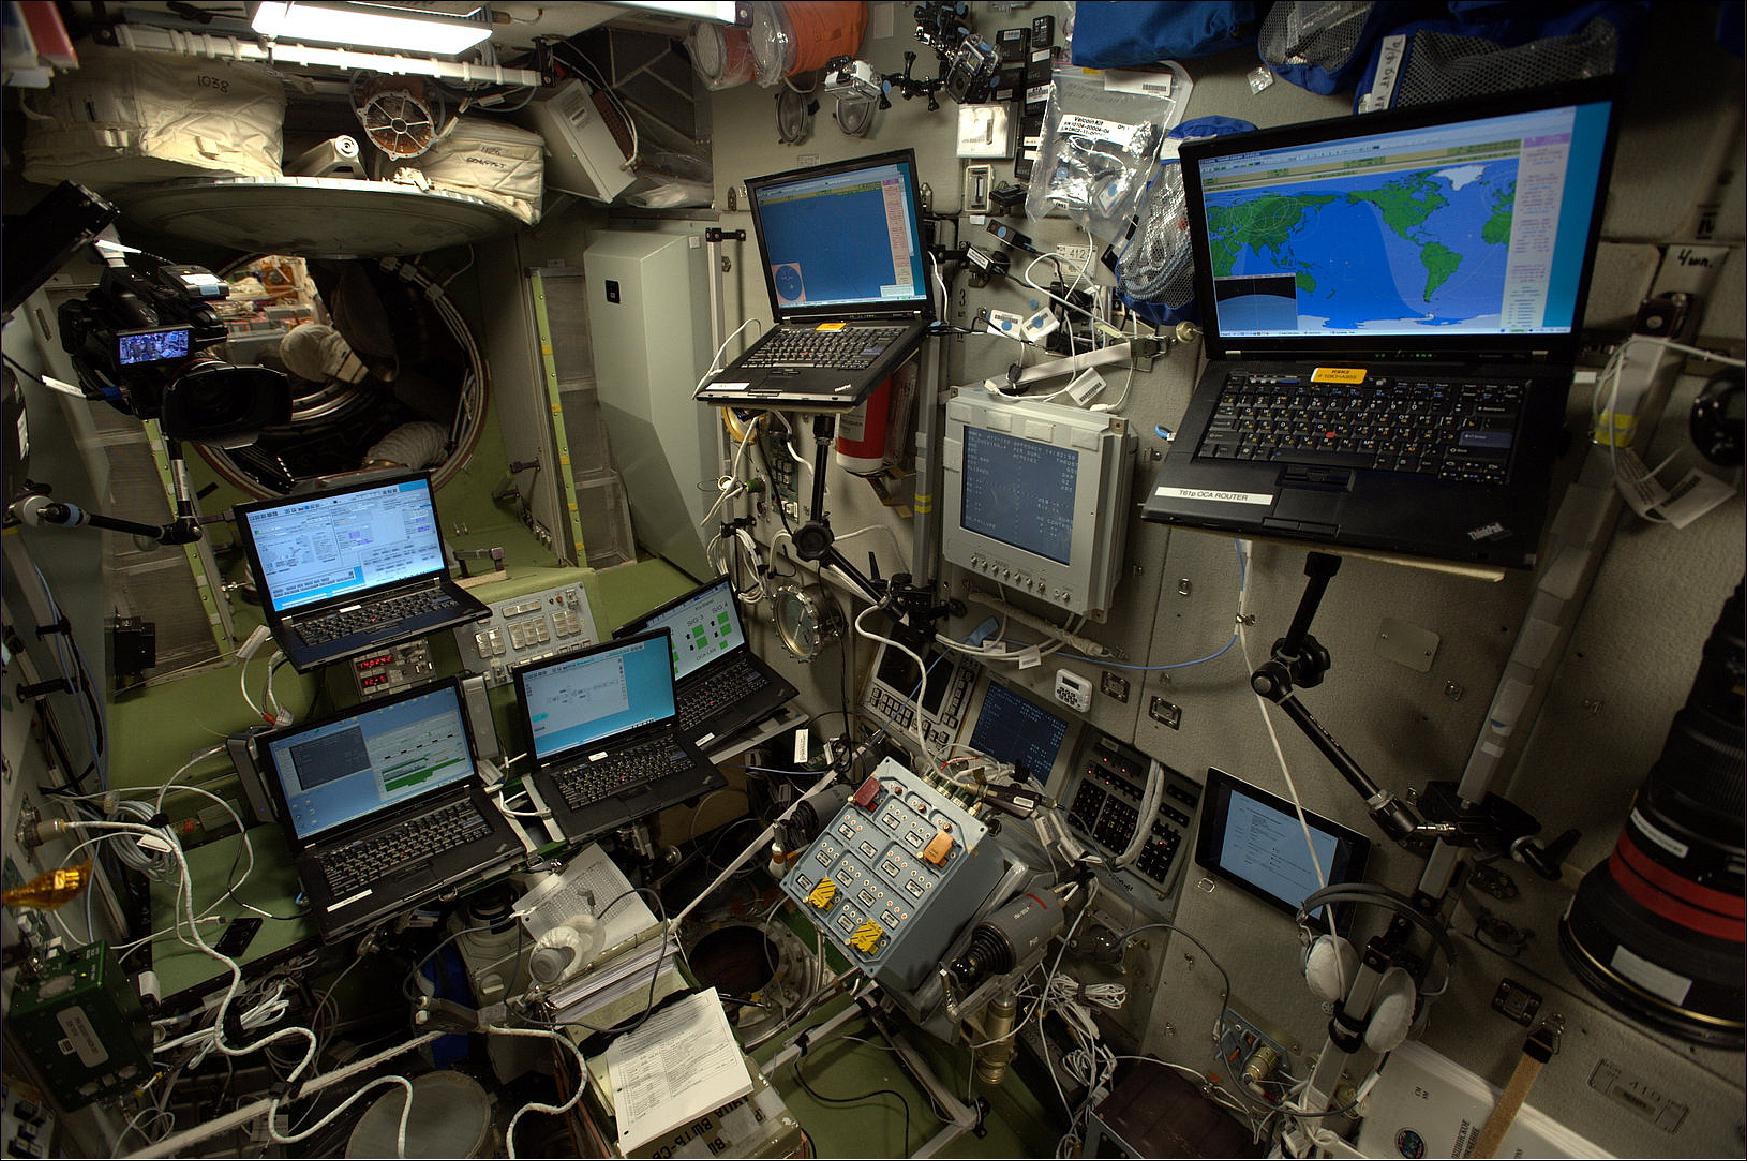 Figure 3: Space station office. The setup in the Russian Zvezda module on the ISS shortly before the docking of Europe's Automated Transfer Vehicle Georges Lemaître (ATV-5). ESA astronaut Alexander Gerst took this picture during his six-month Blue Dot mission running experiments and maintaining the world's weightless research center in space. He Tweeted the image with the text "My office"(image credit: ESA/NASA)